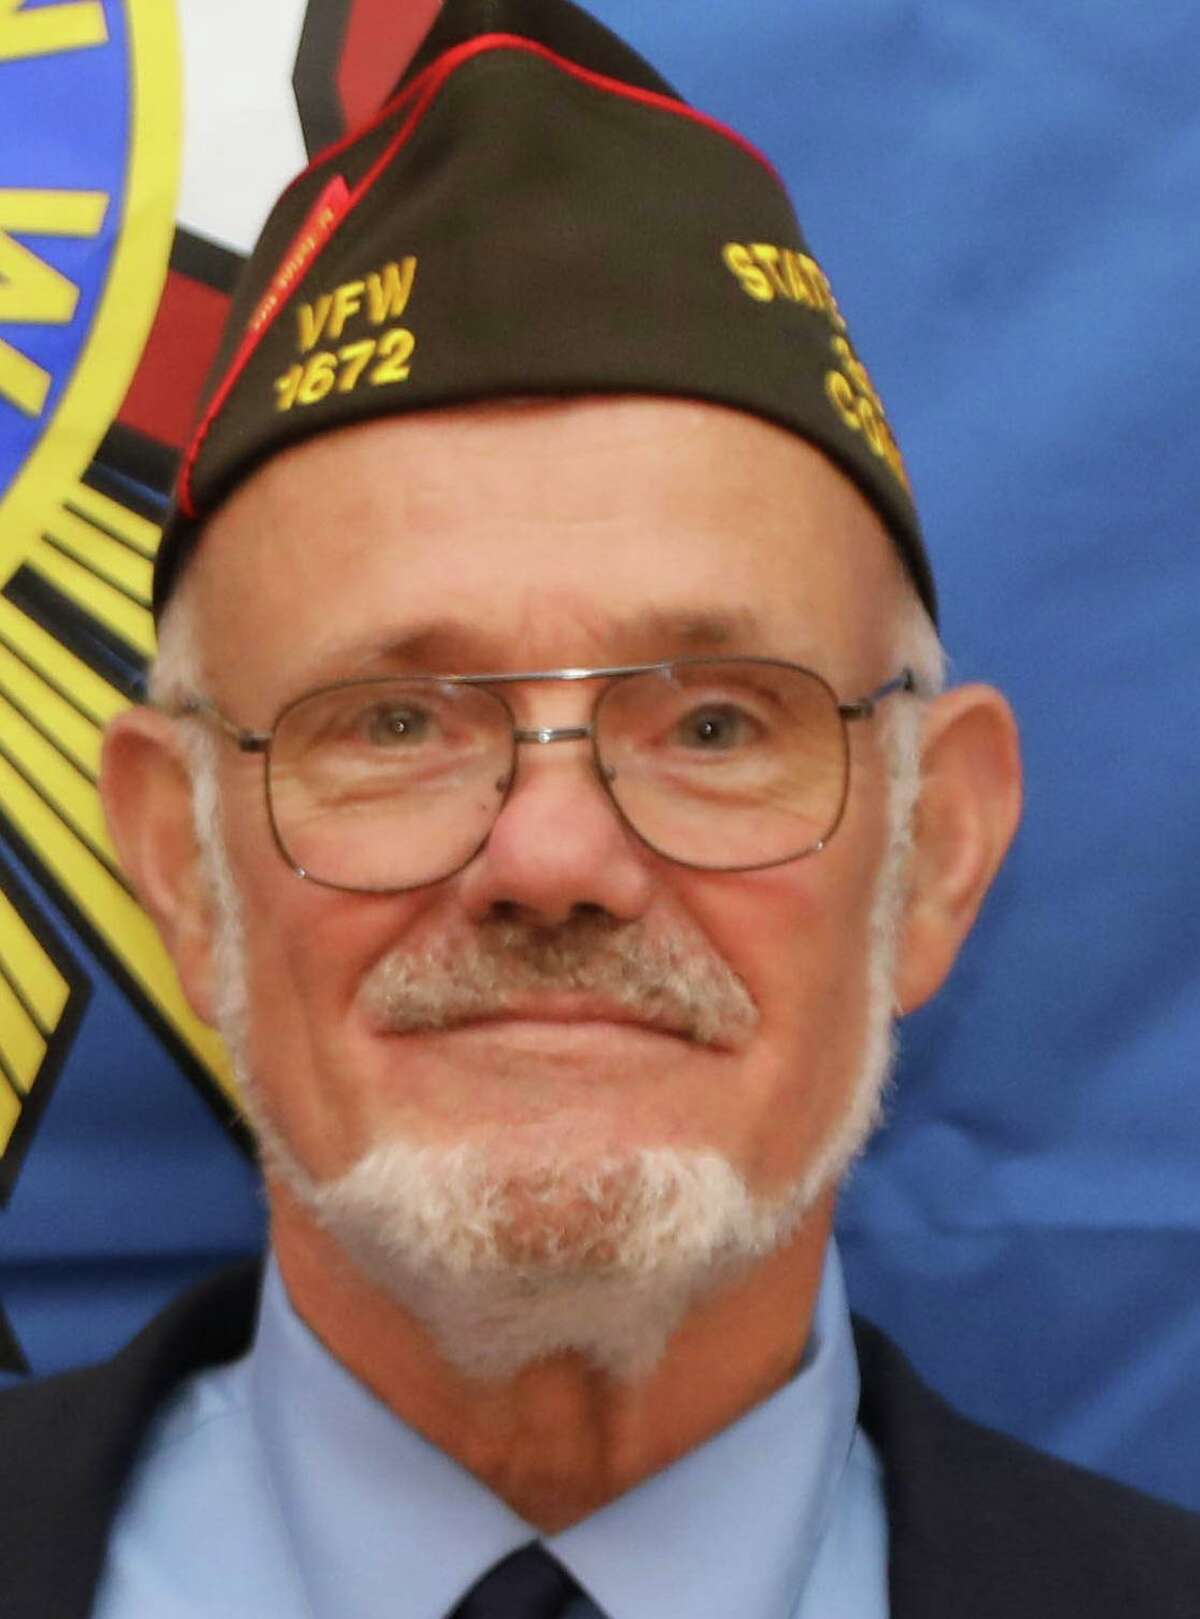 Jim Delancy has resumed command of the VFW in New Milford, a role he has held off and on for 11 years.